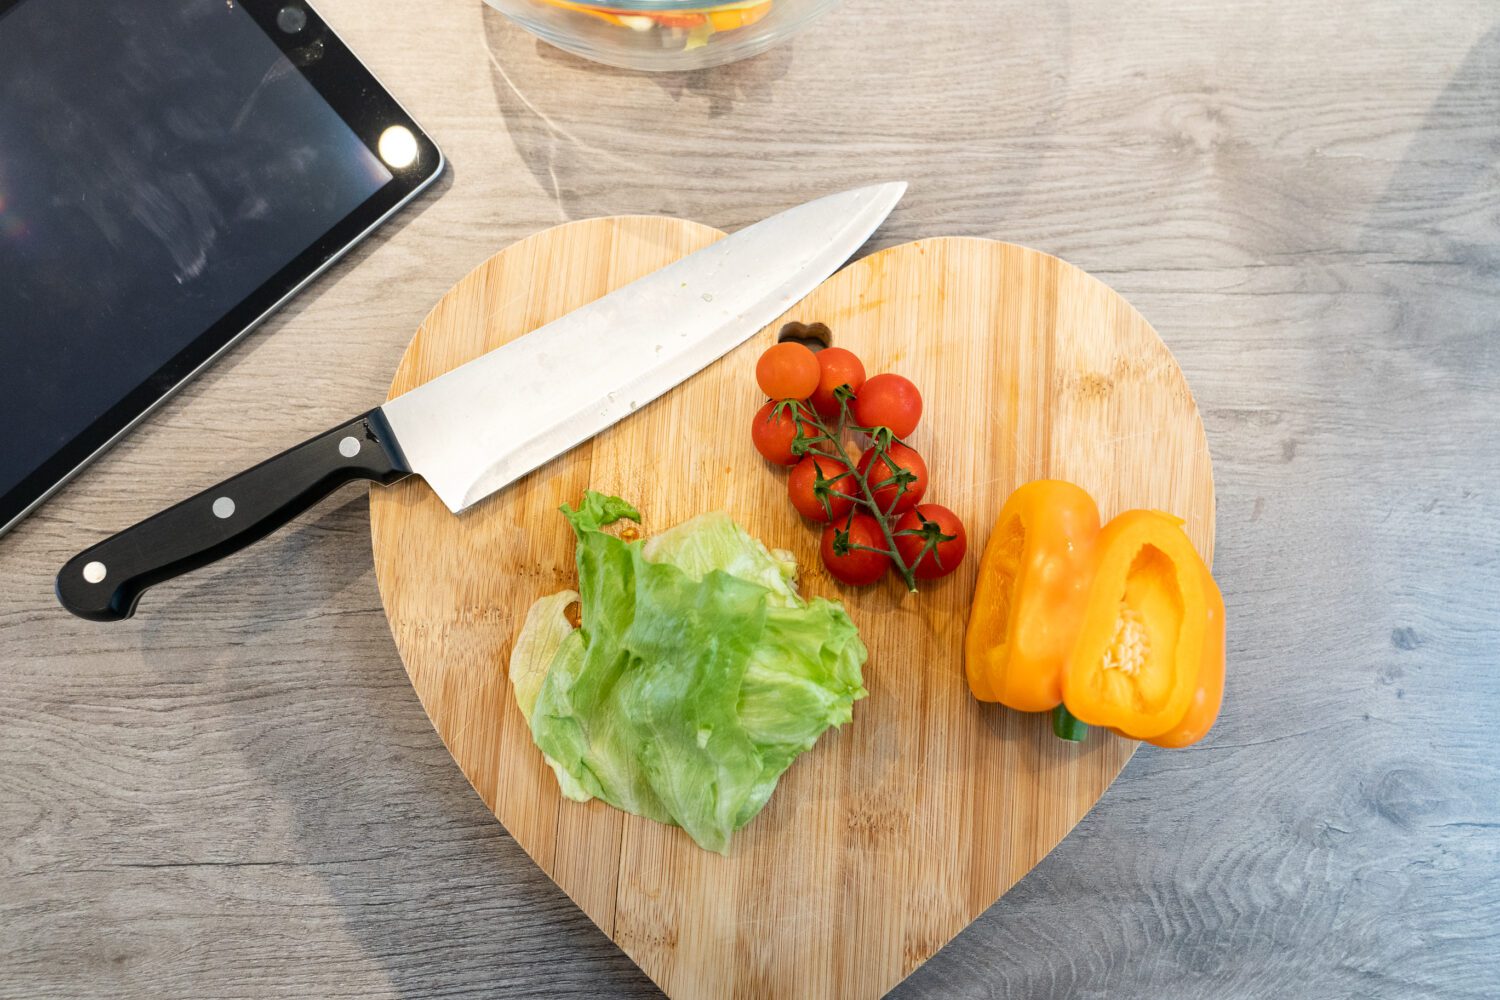 Love heart shape chopping board with pepper, tomatoes, and lettuce